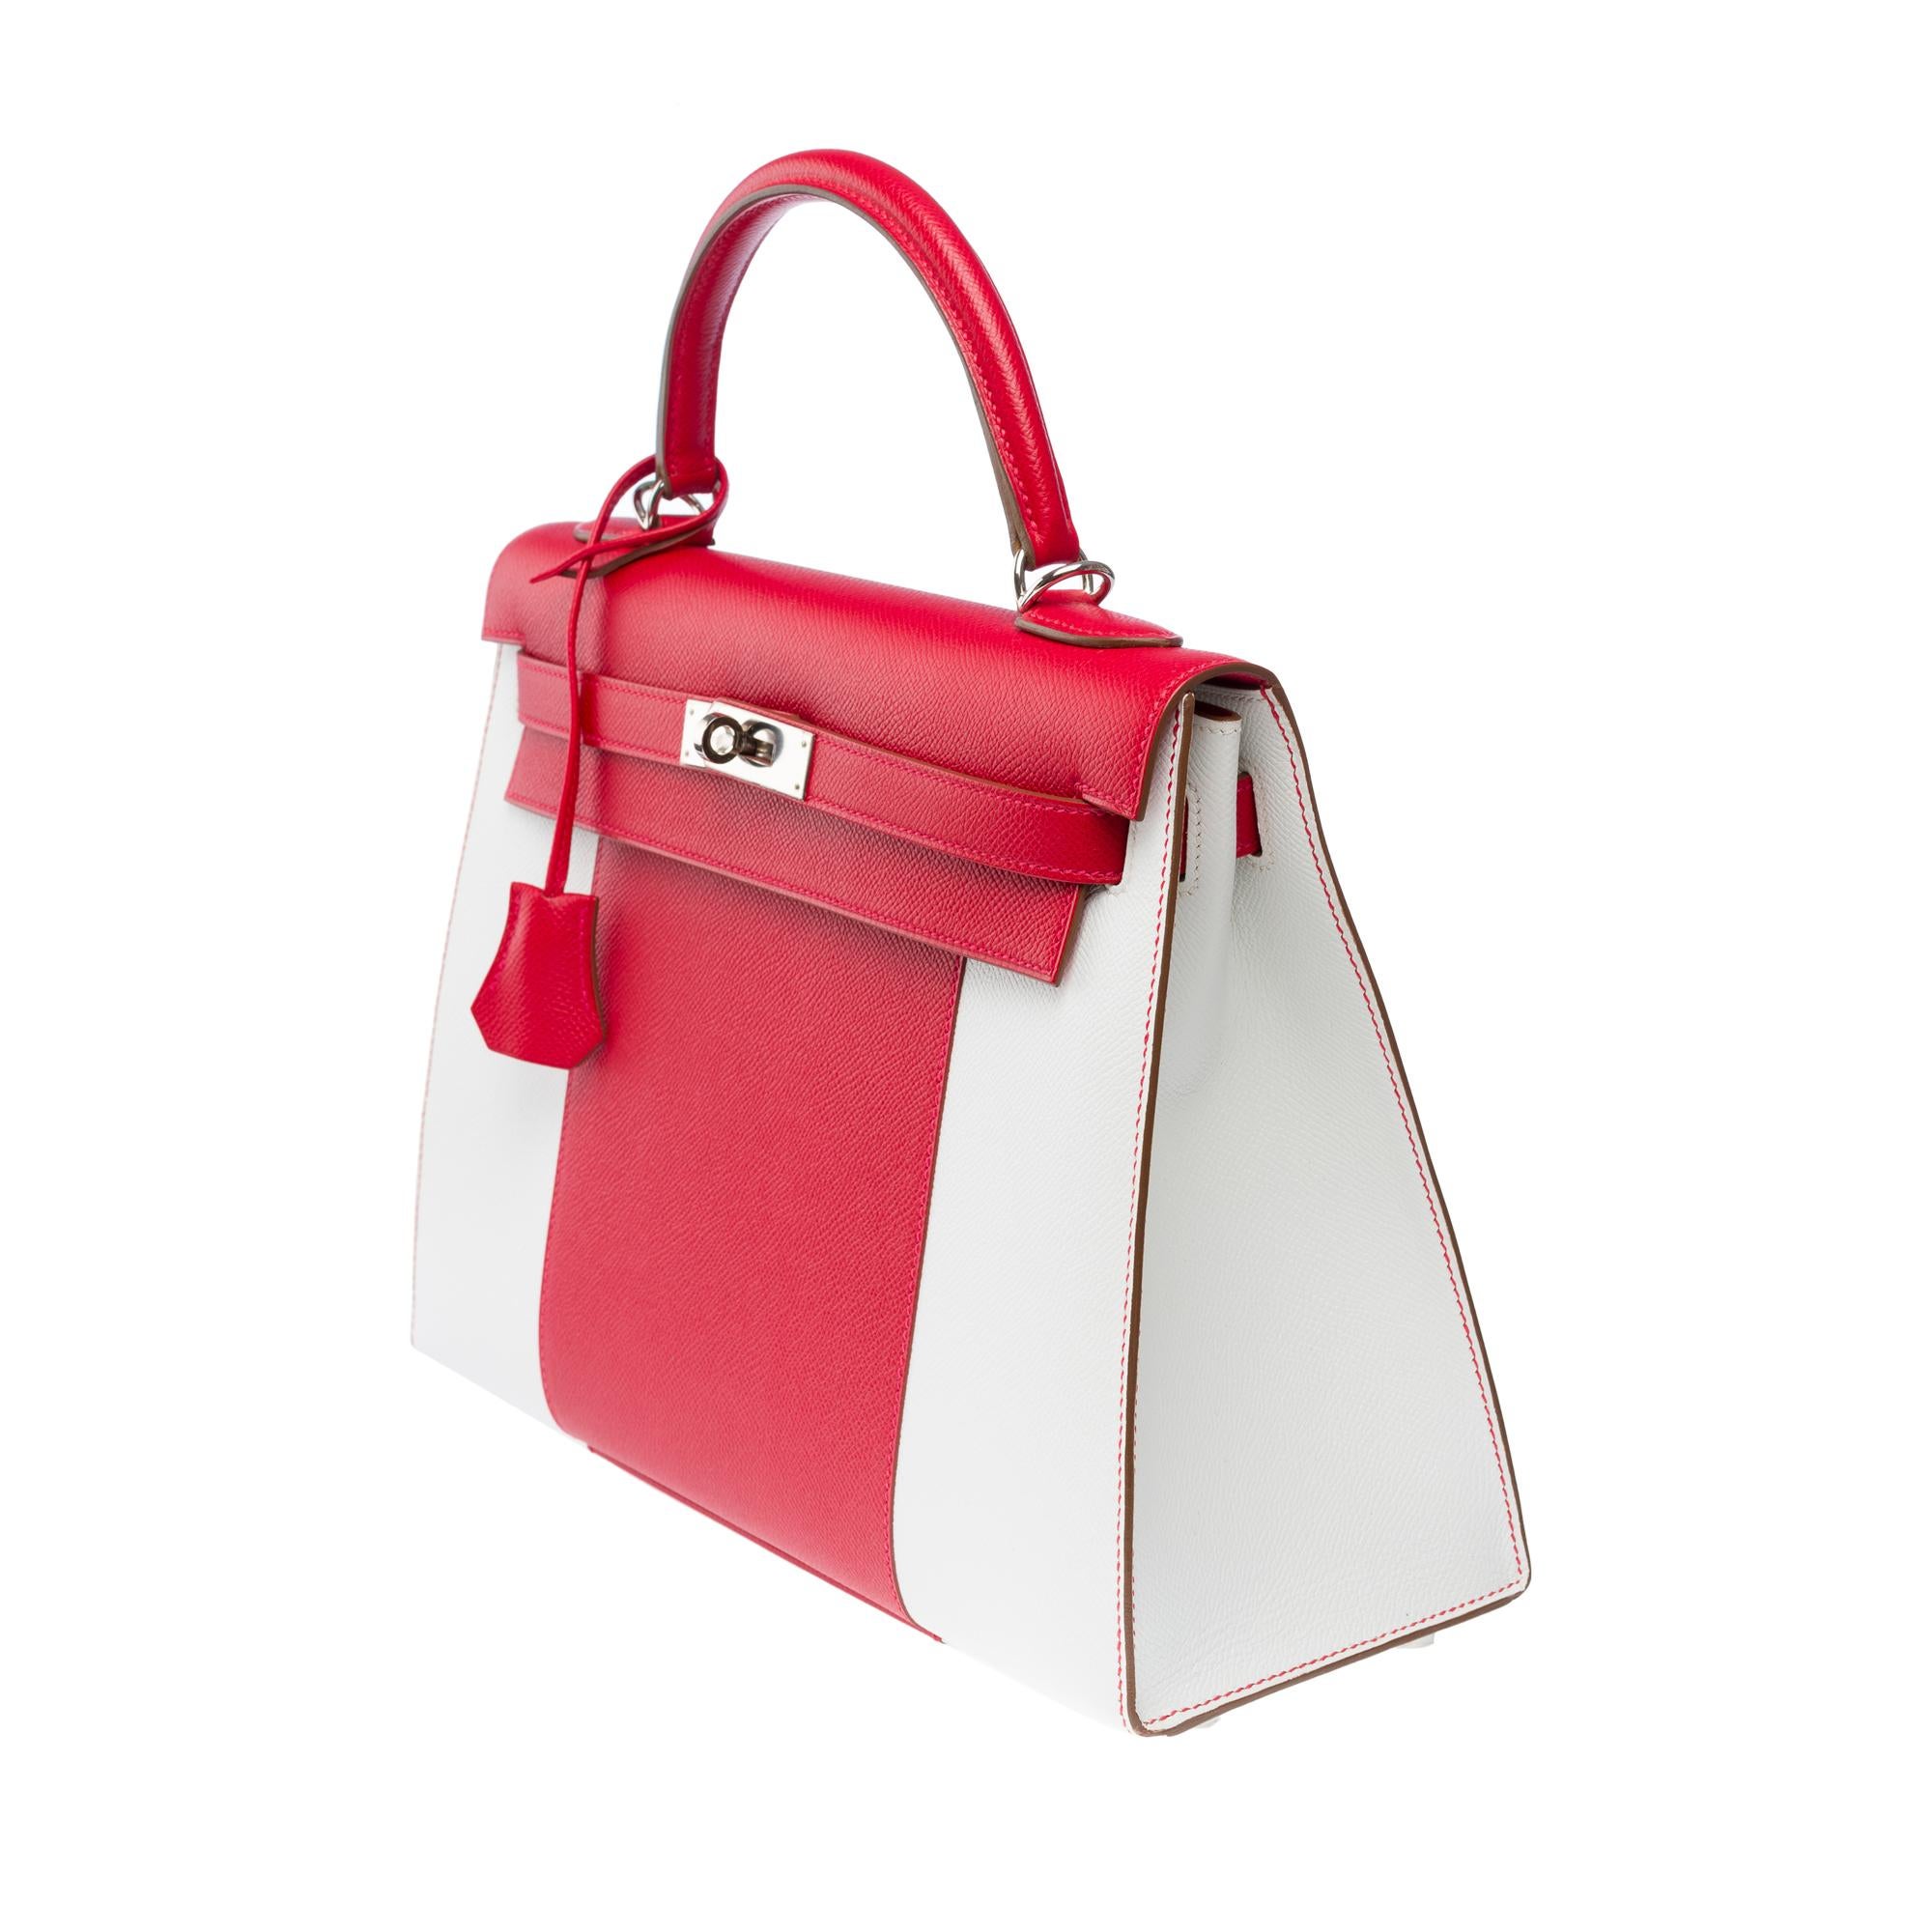 Women's Flag limited edition Hermès Kelly 32  handbag strap in red and white epsom, PHW